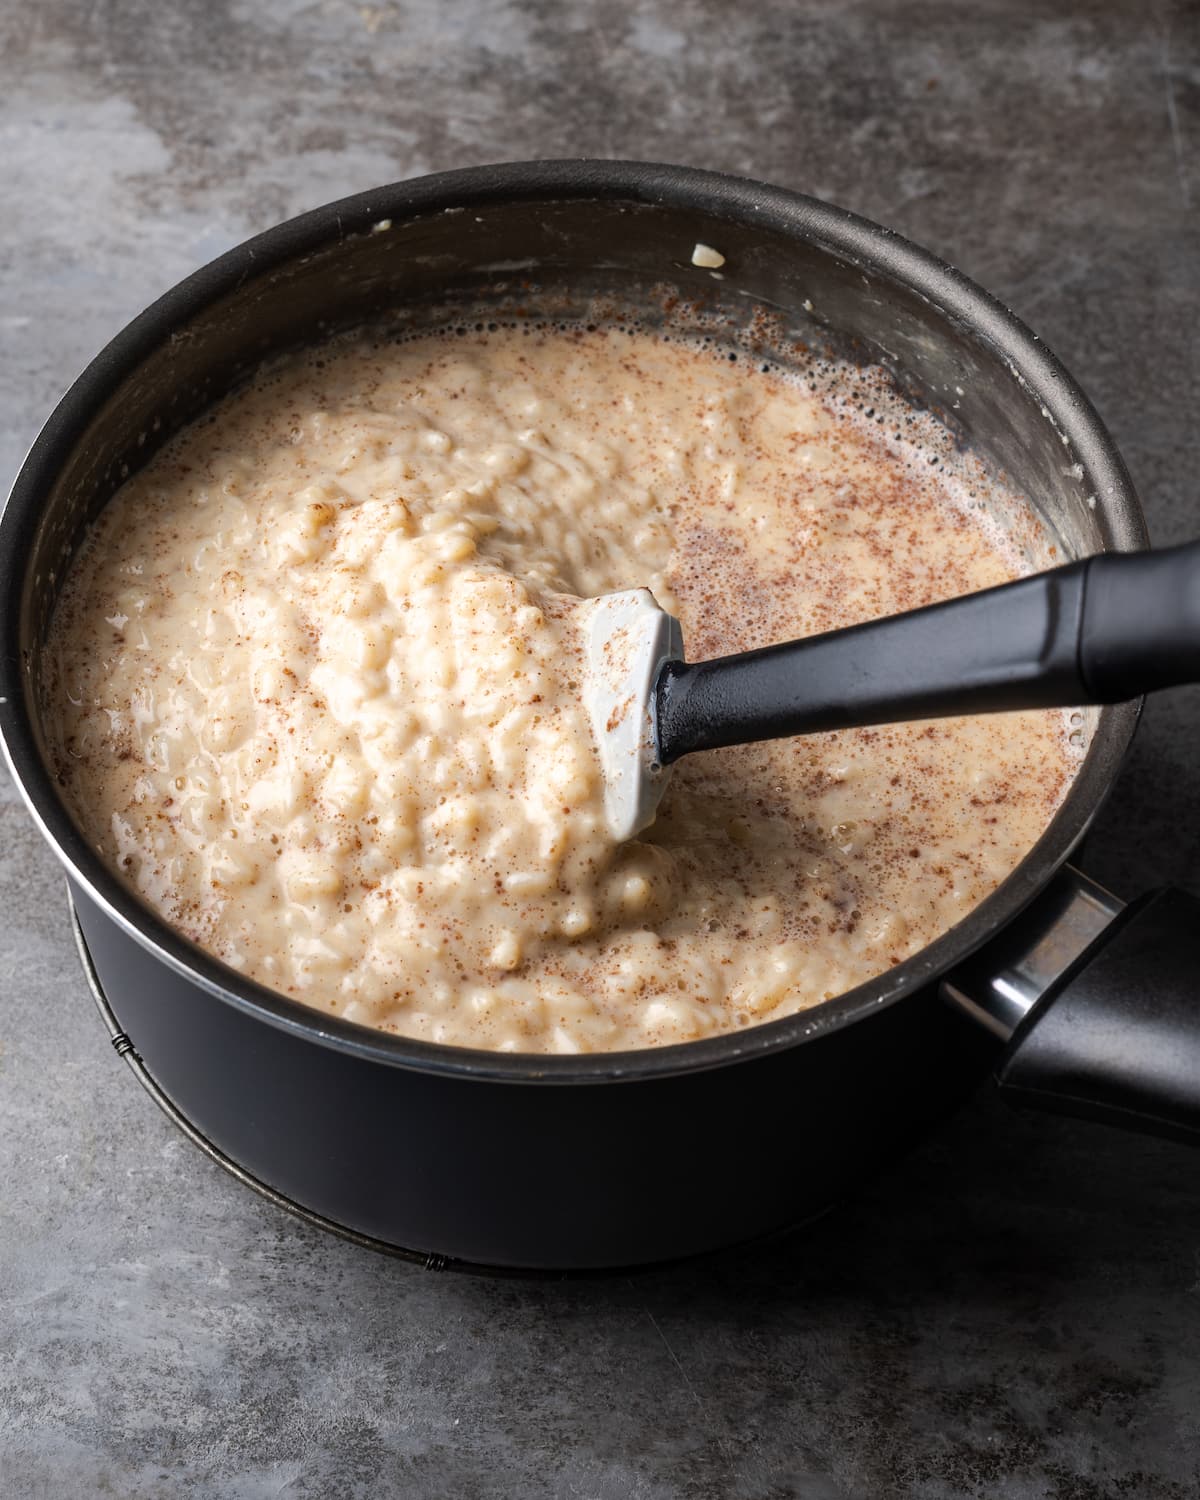 A black saucepan filled with creamy rice pudding with a spatula.